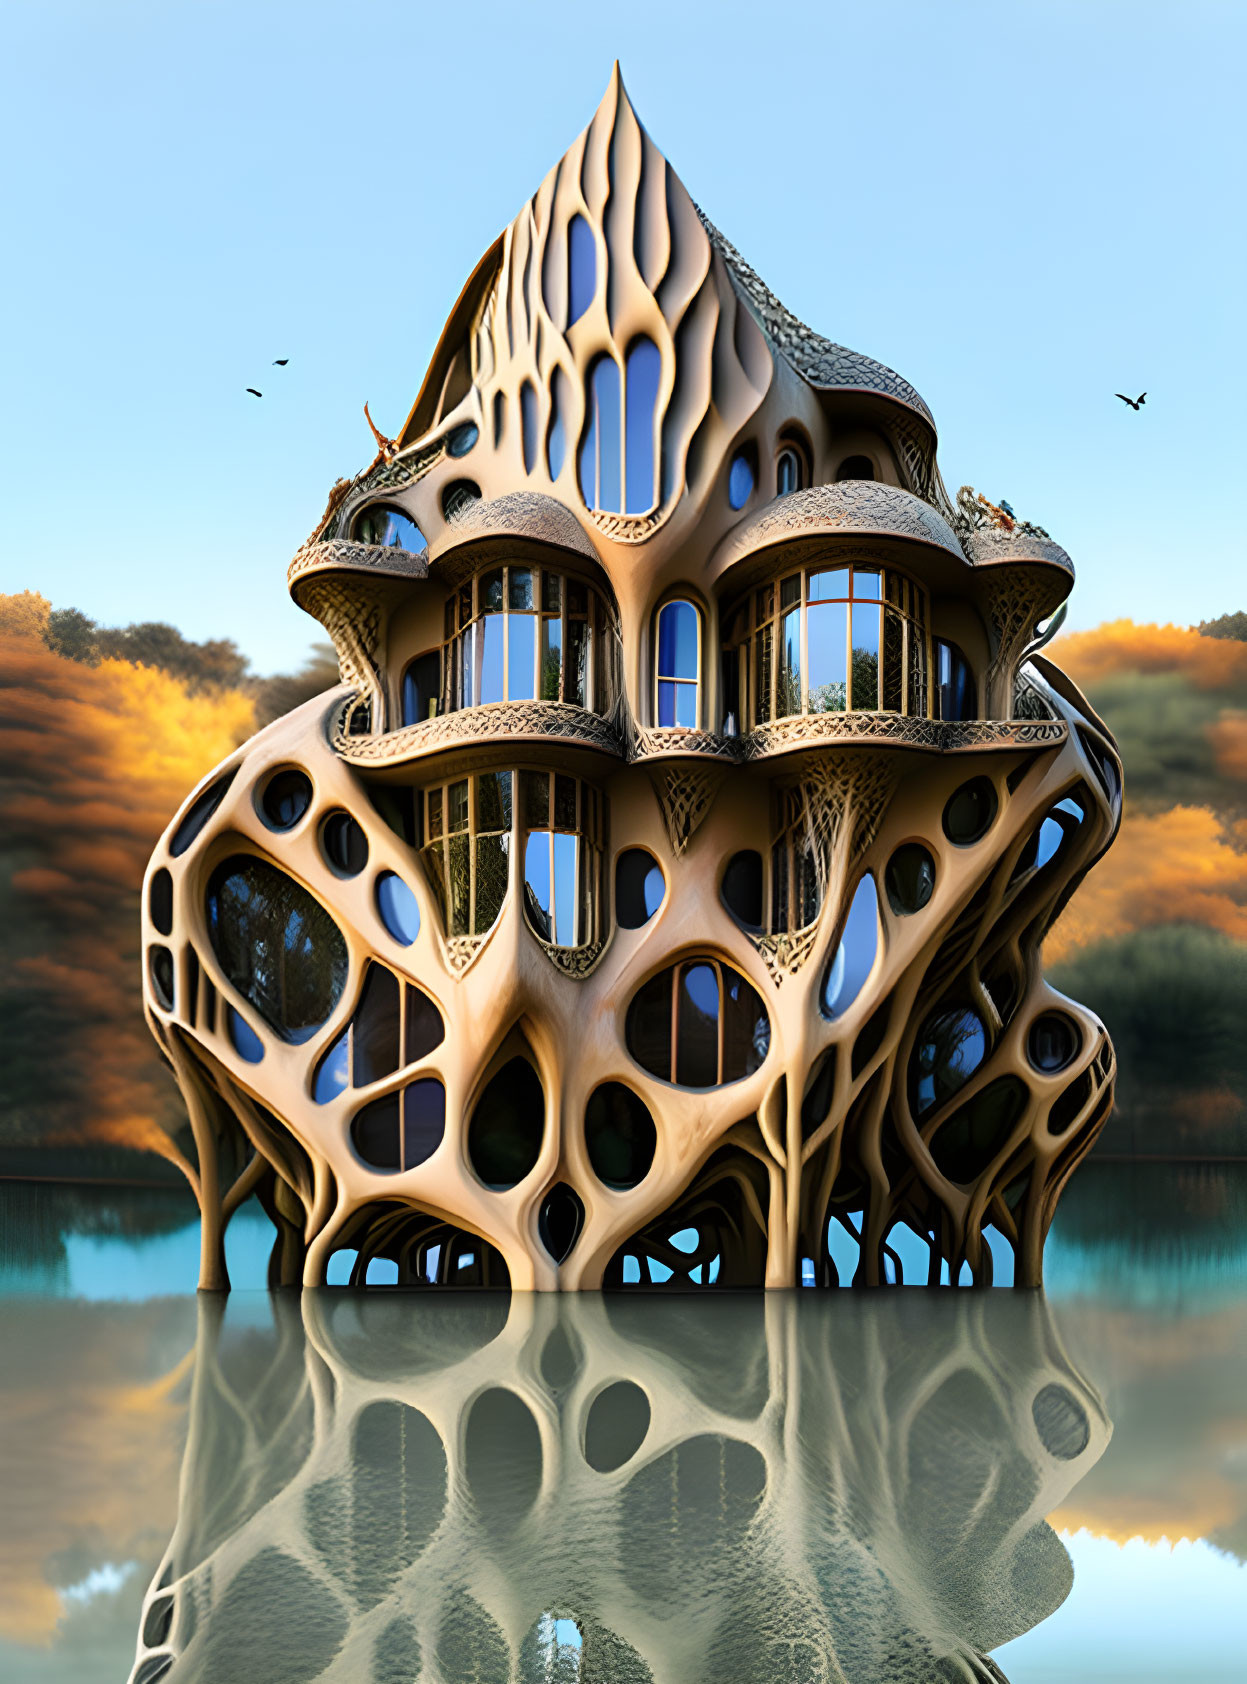 Futuristic digital building with organic design by tranquil lake at sunset